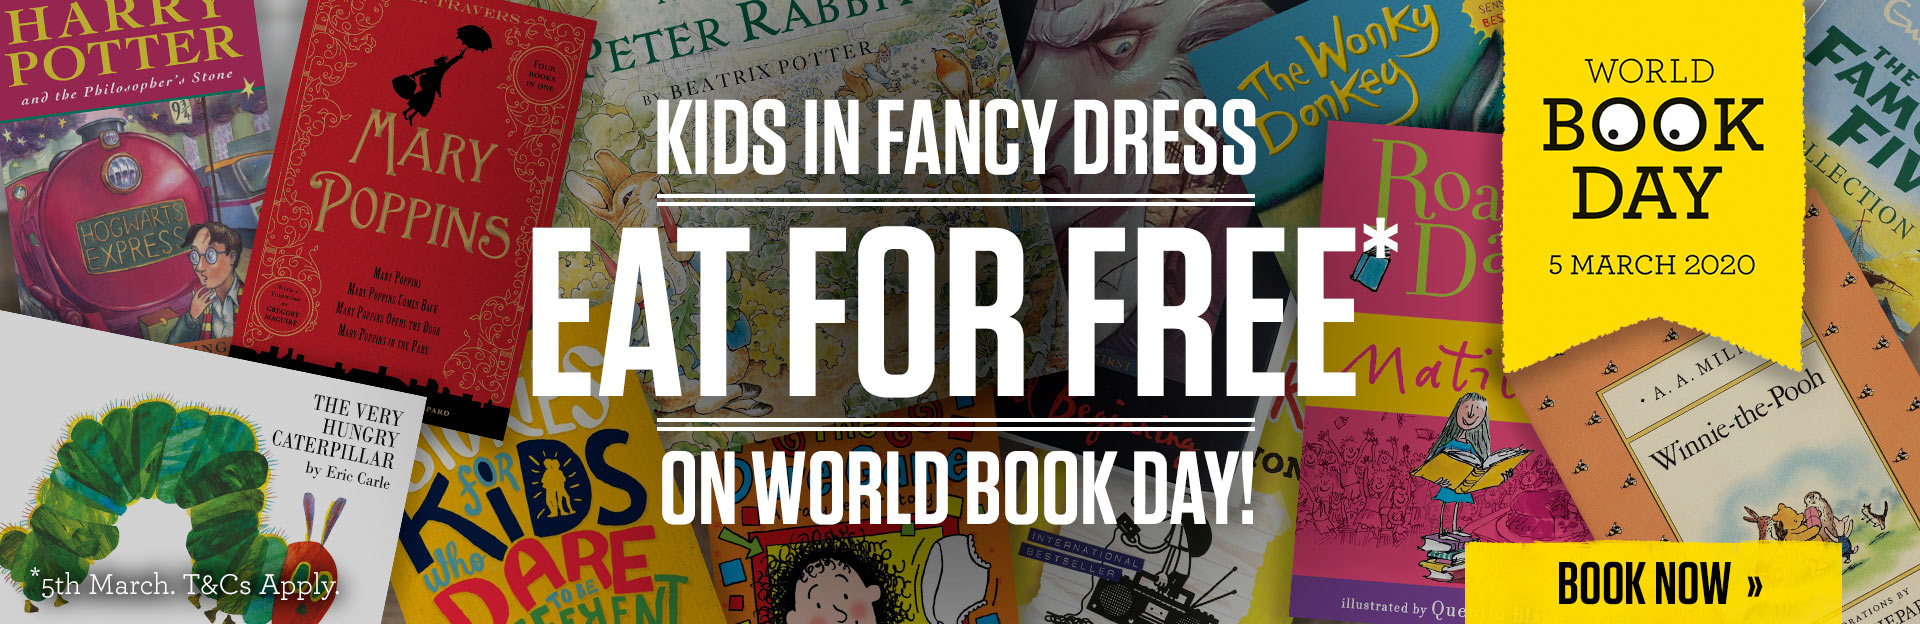 World Book Day at Sizzling Pubs